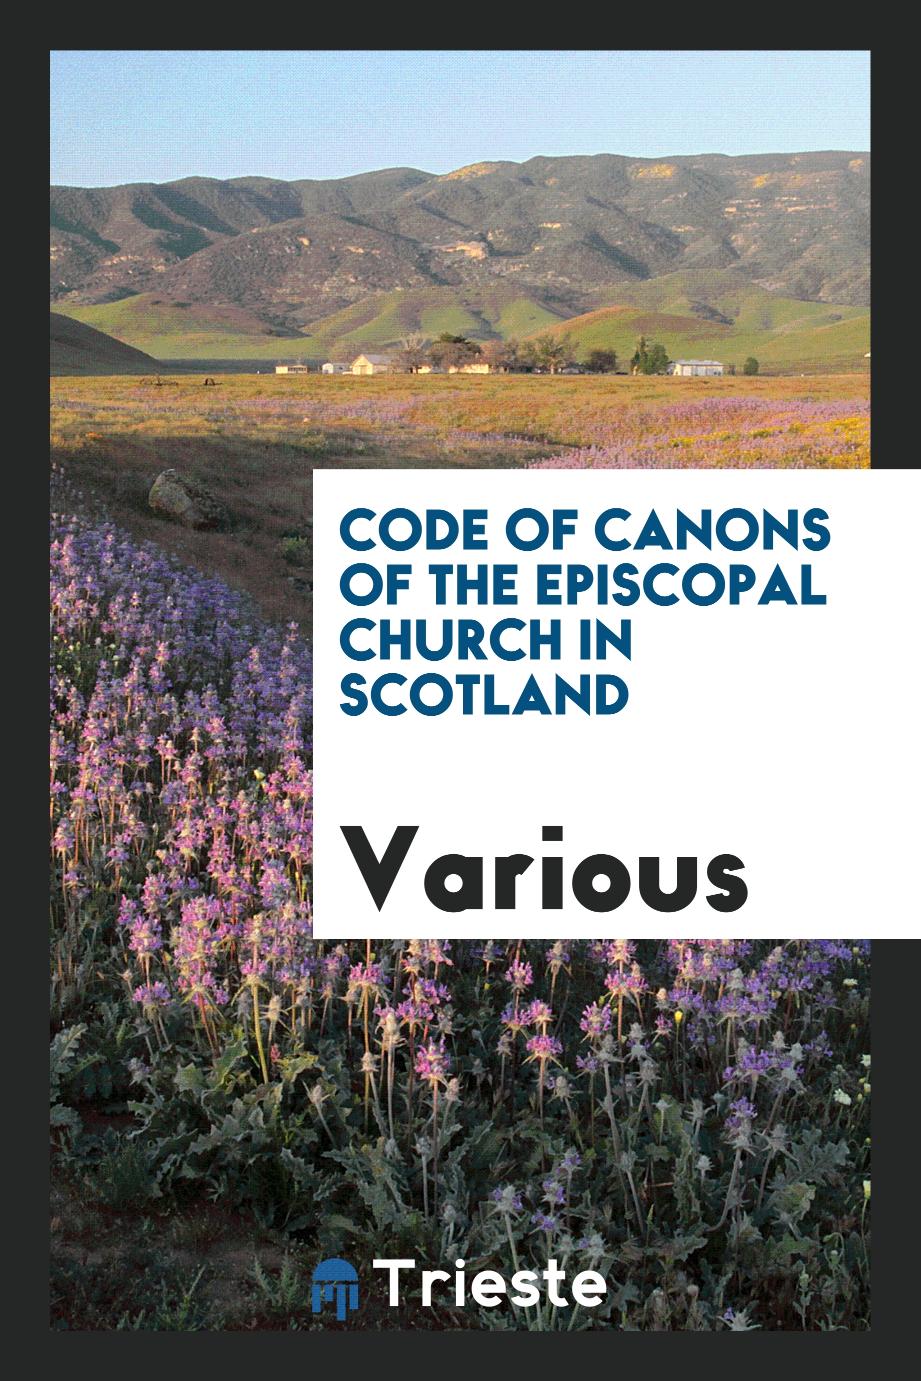 Code of canons of the Episcopal Church in Scotland